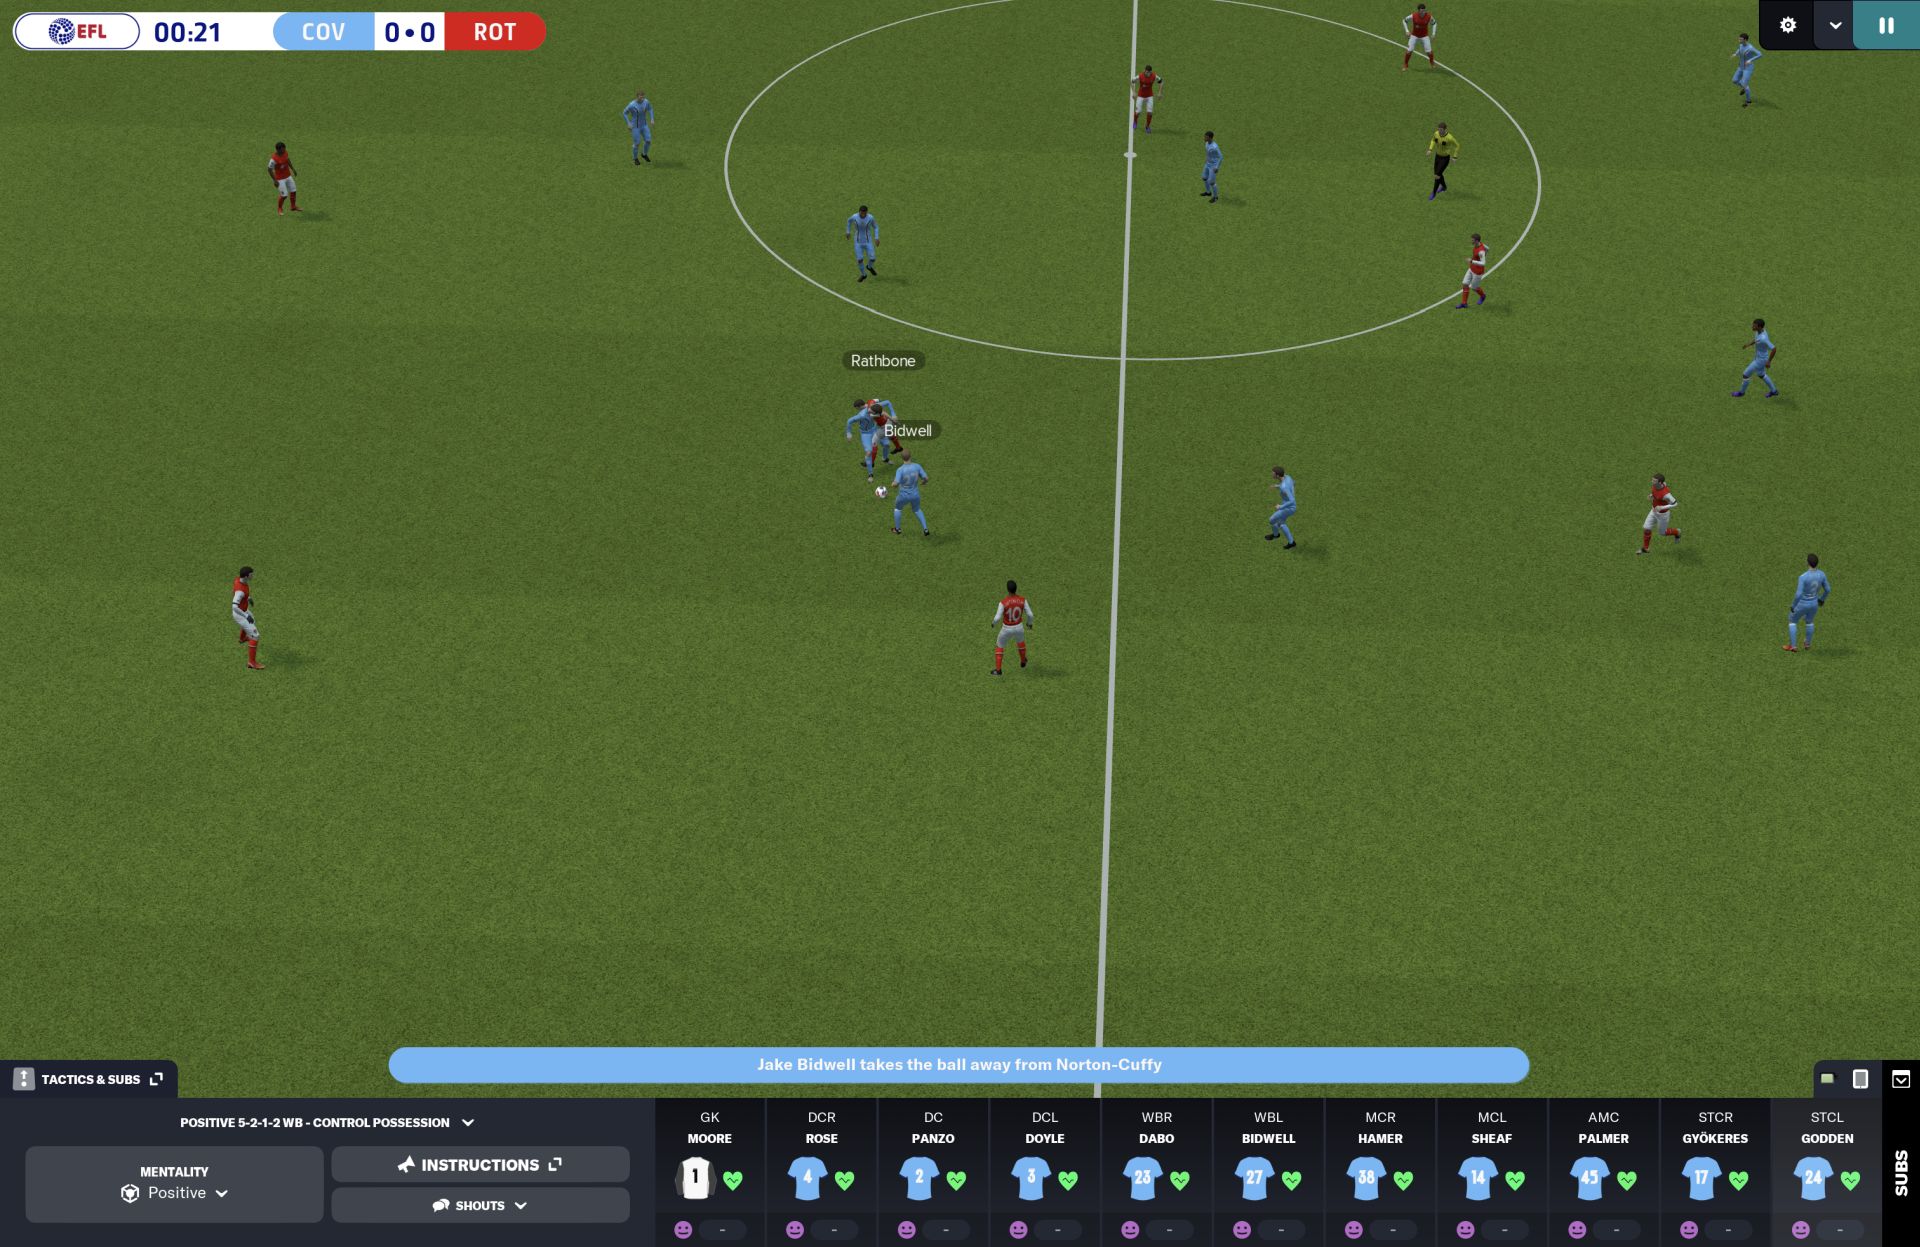 Football manager 2023